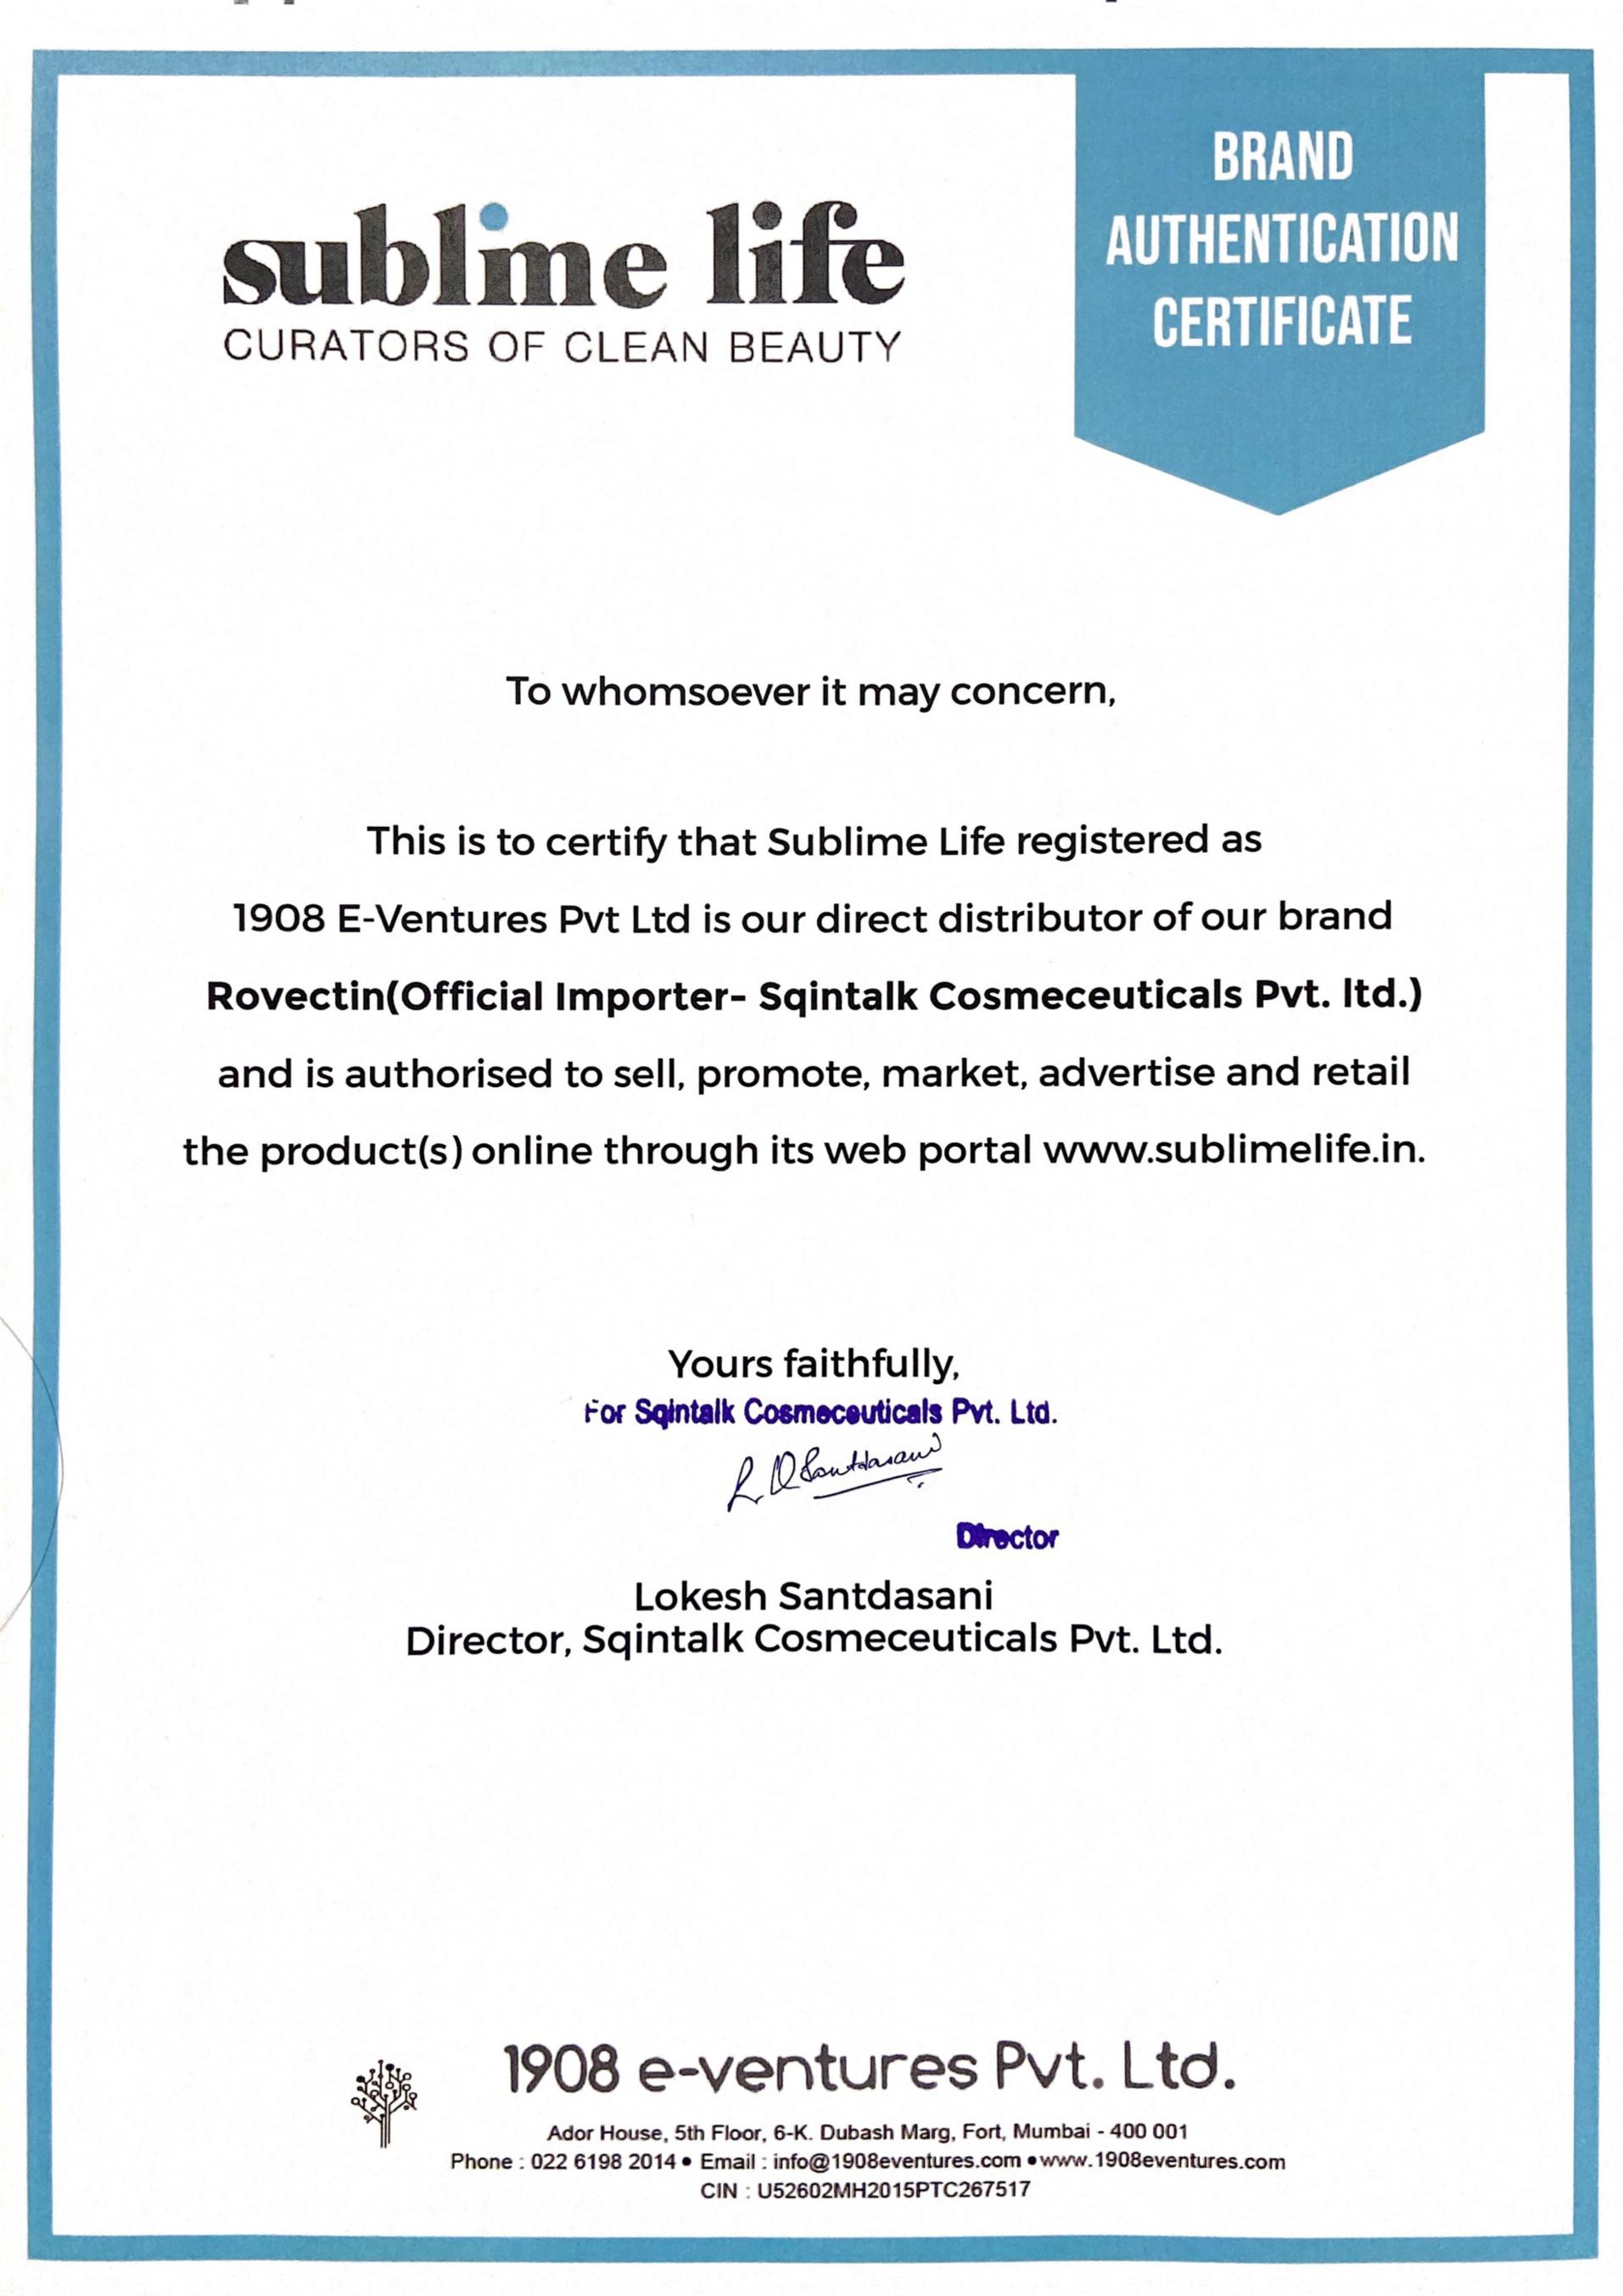 Brand Authentication Certificate - Rovectin